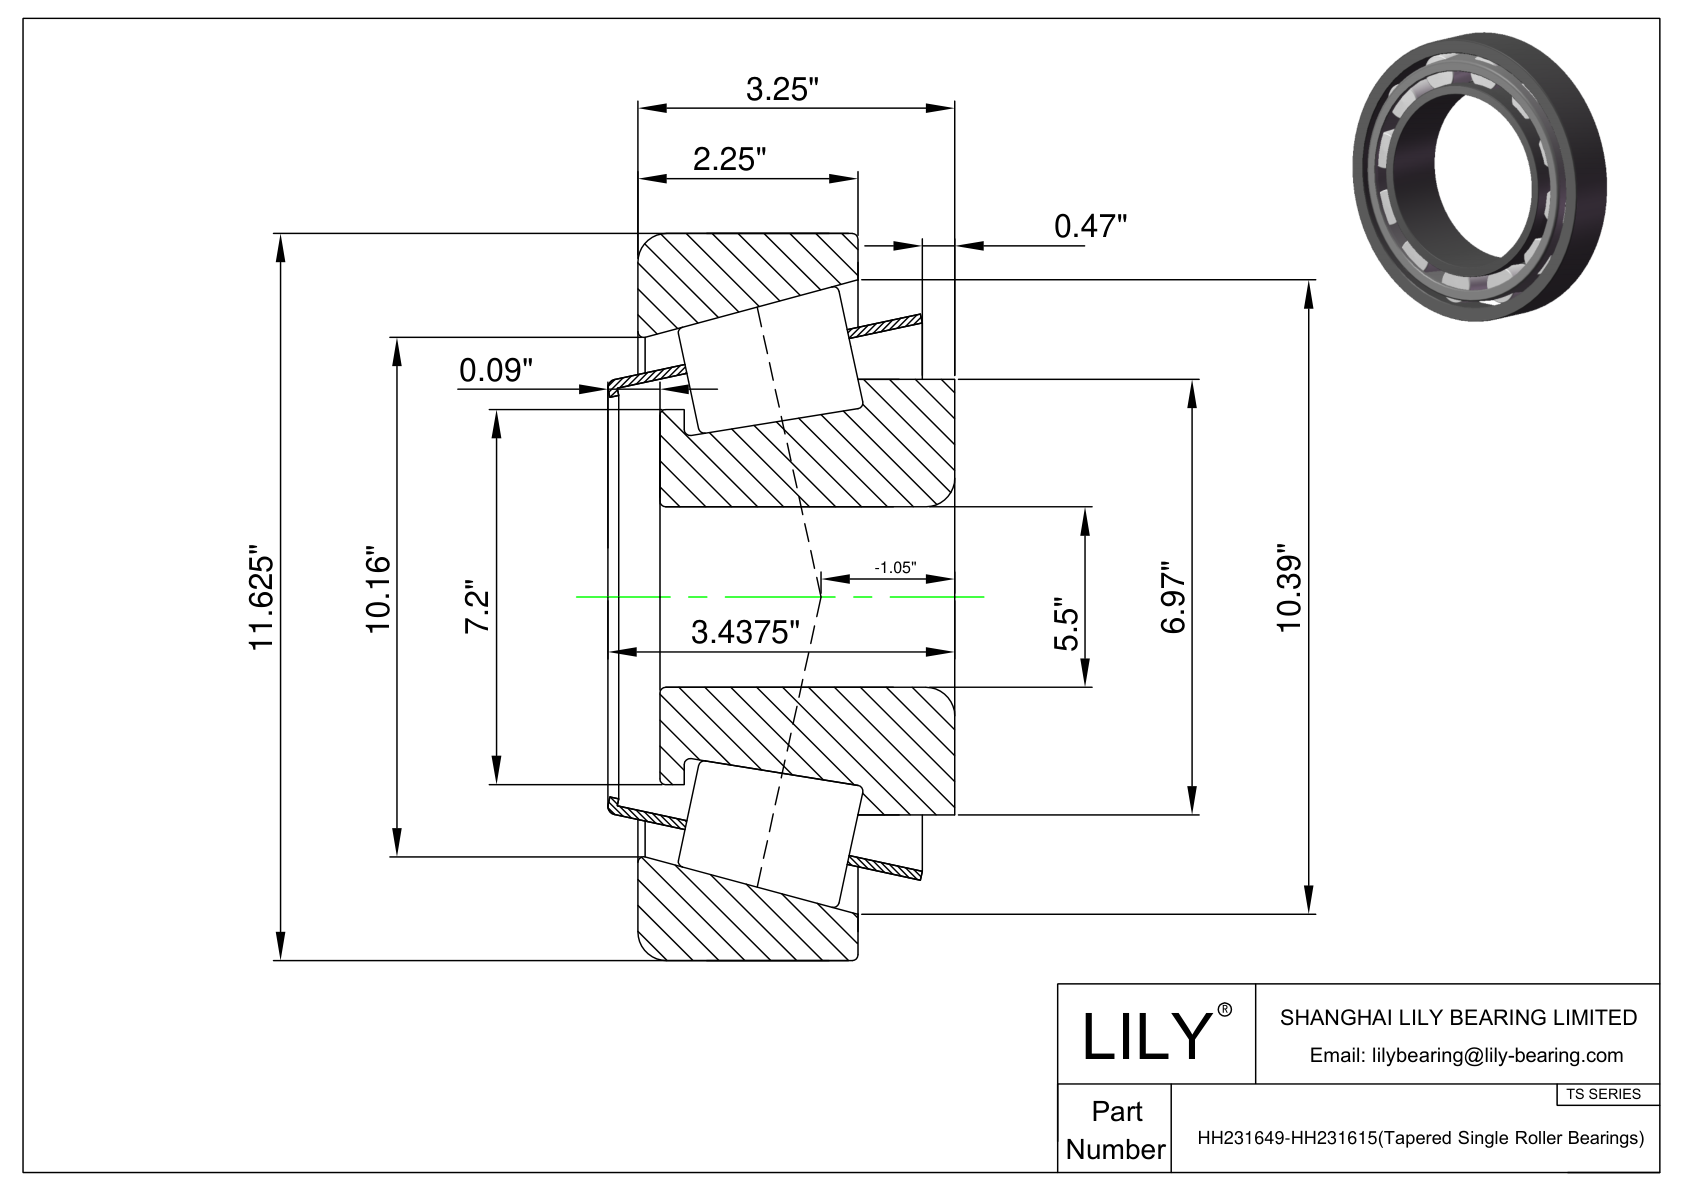 HH231649-HH231615 TS (Tapered Single Roller Bearings) (Imperial) cad drawing